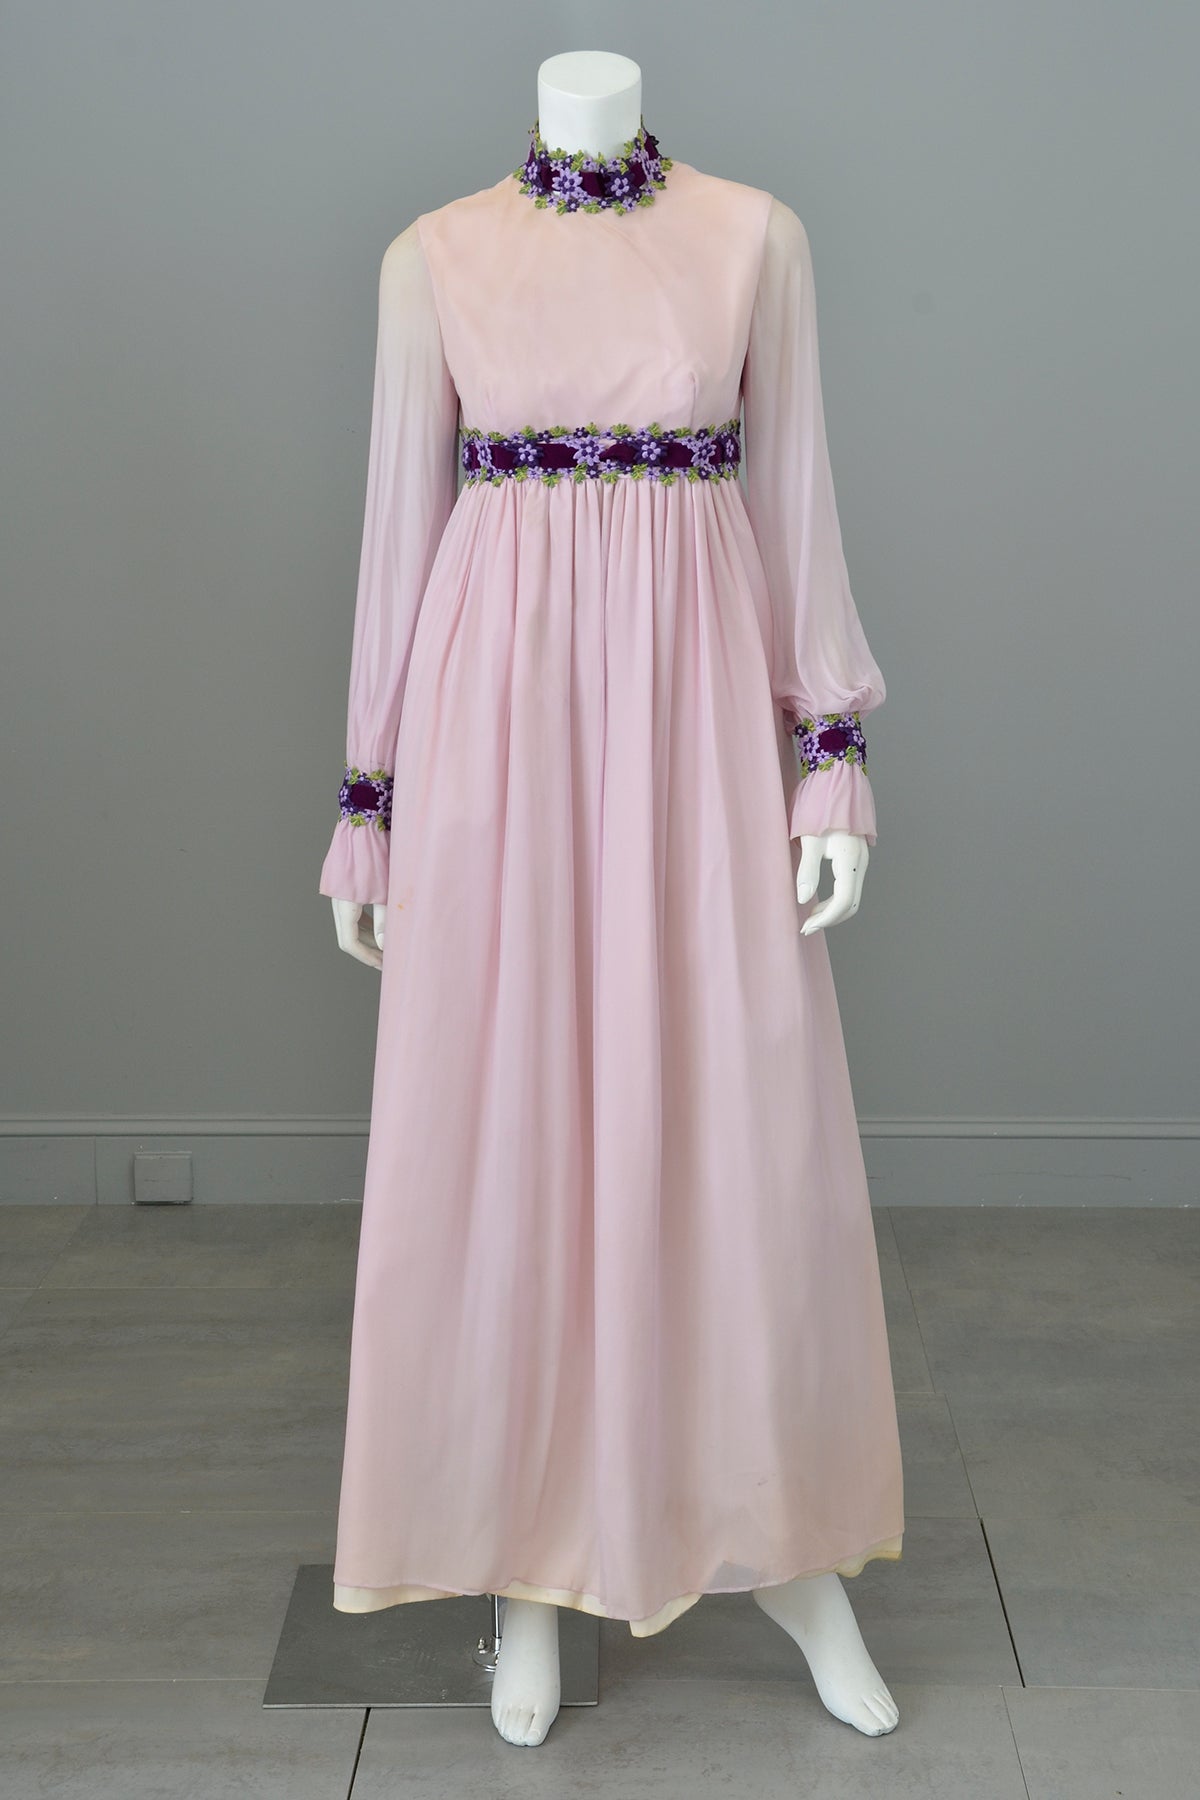 70s Prom, Formal, Evening, Party Dresses